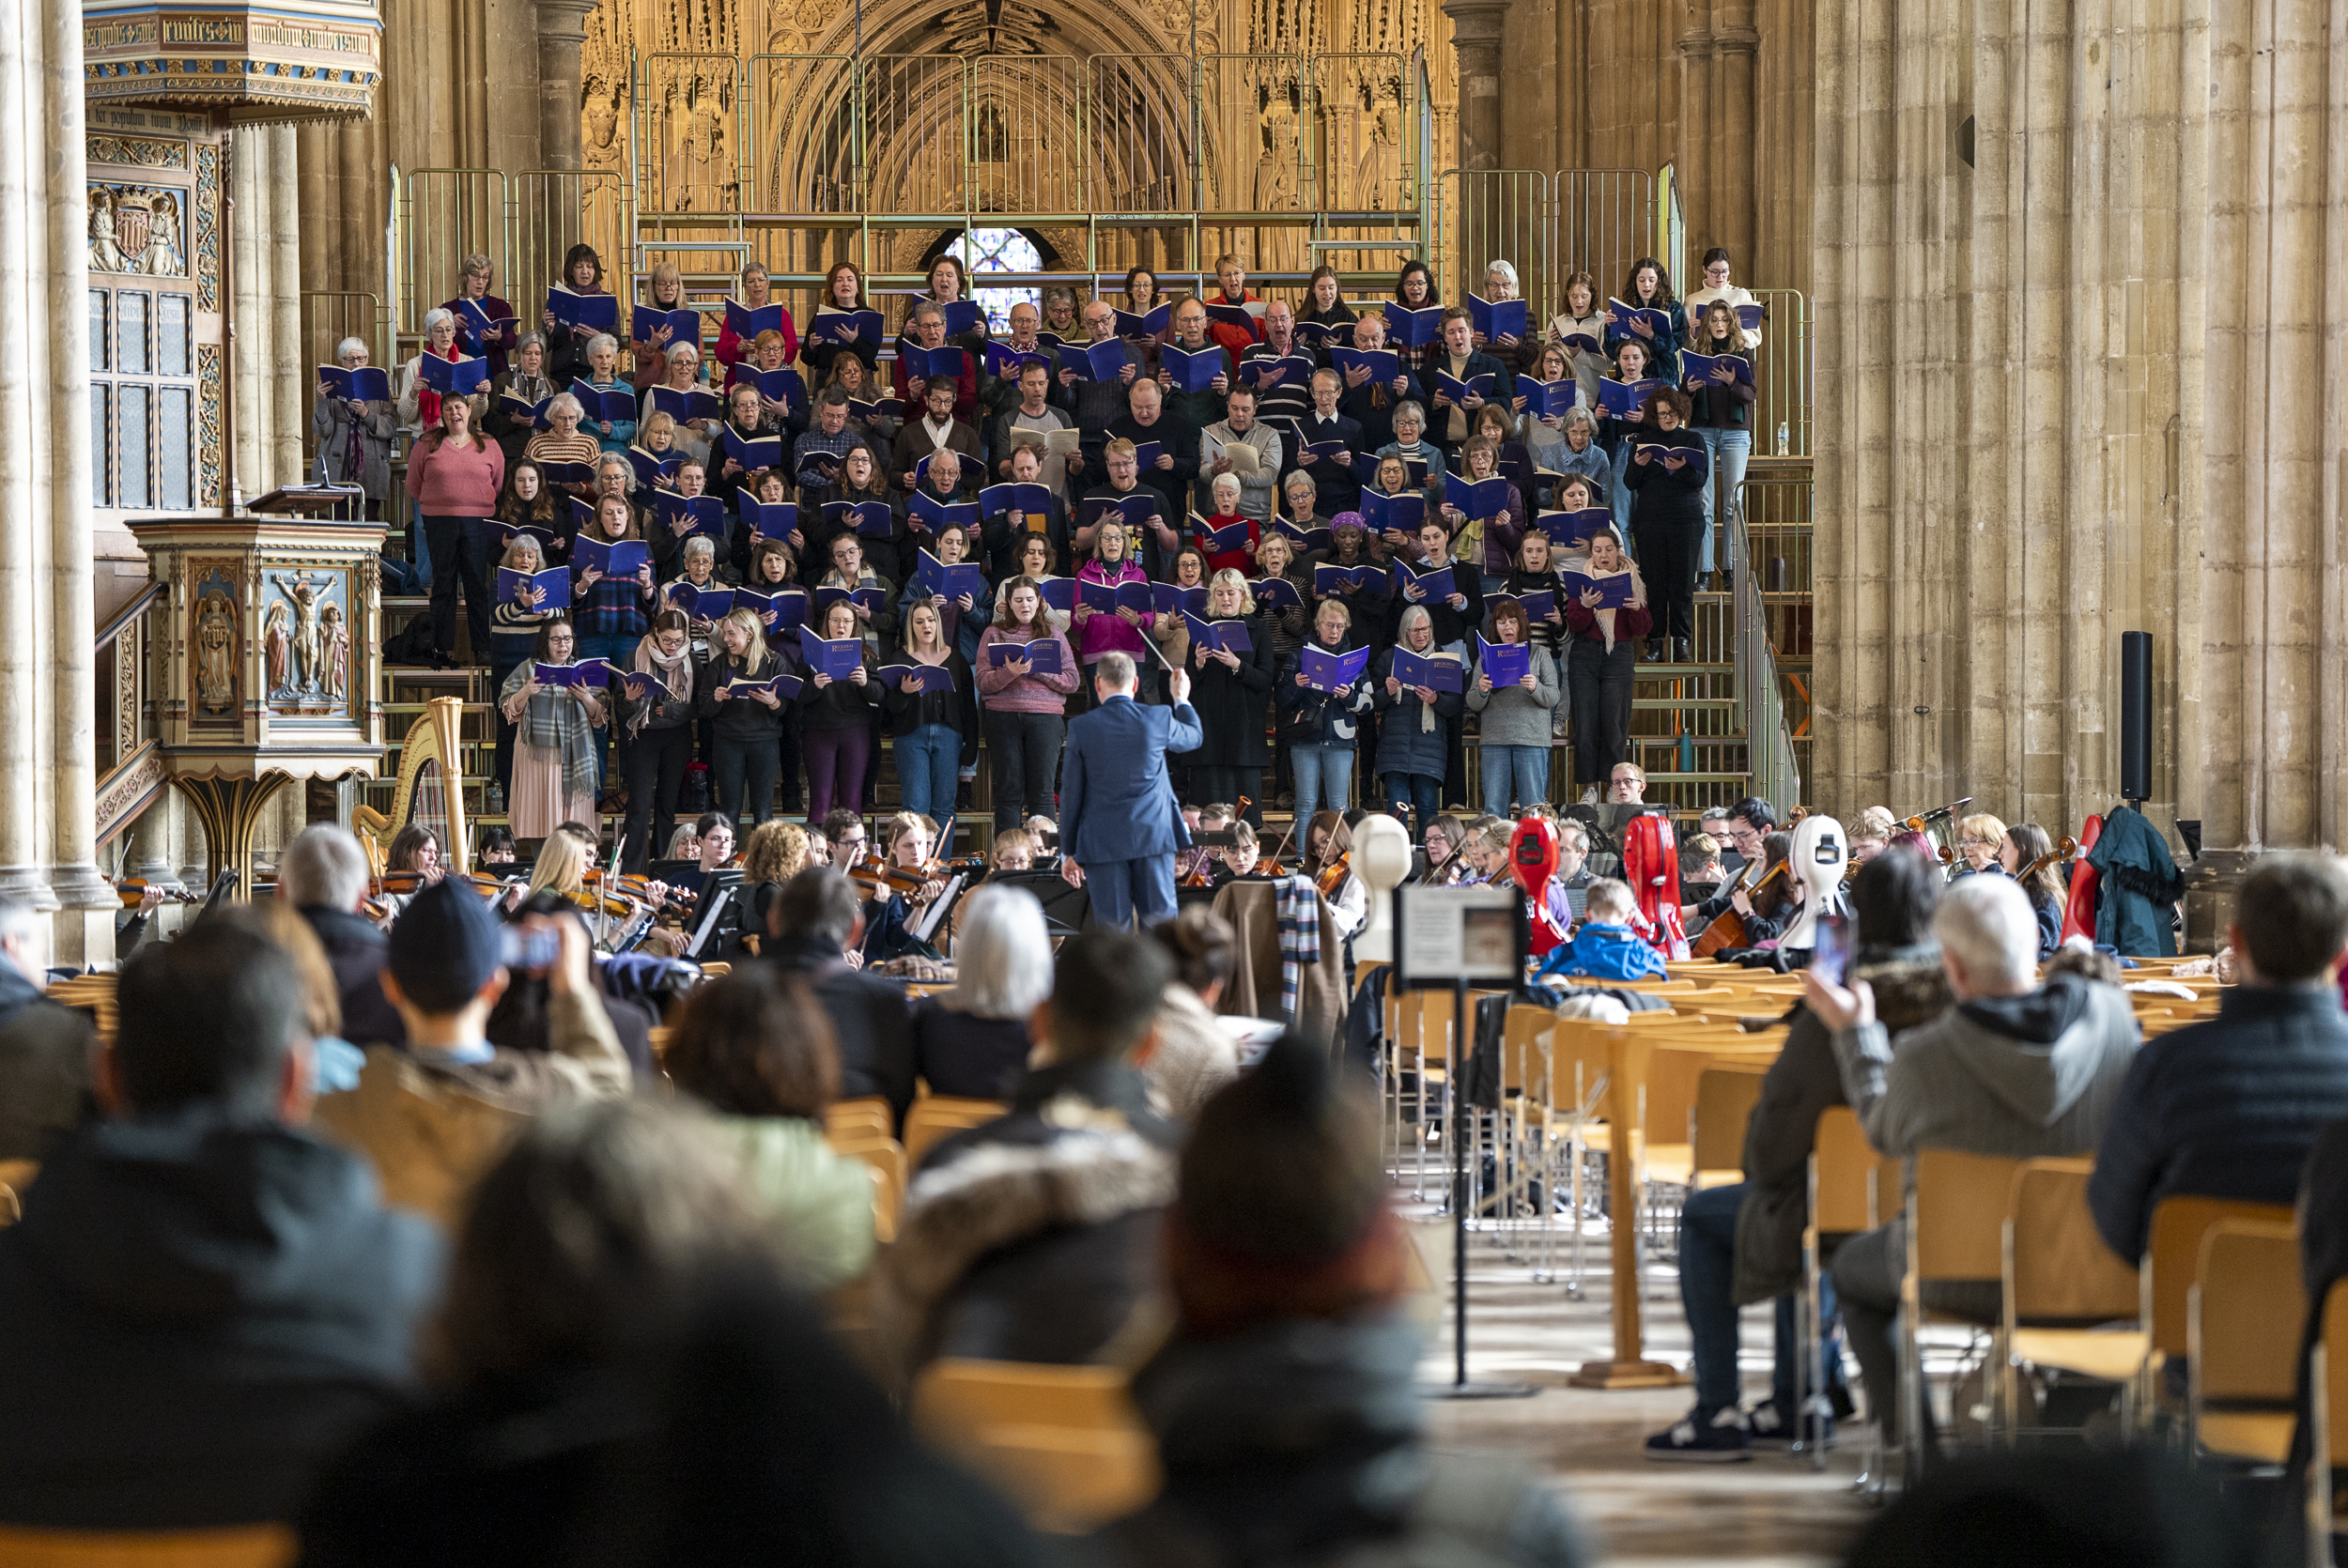 Image Gallery: Chorus and Orchestra at the Cathedral